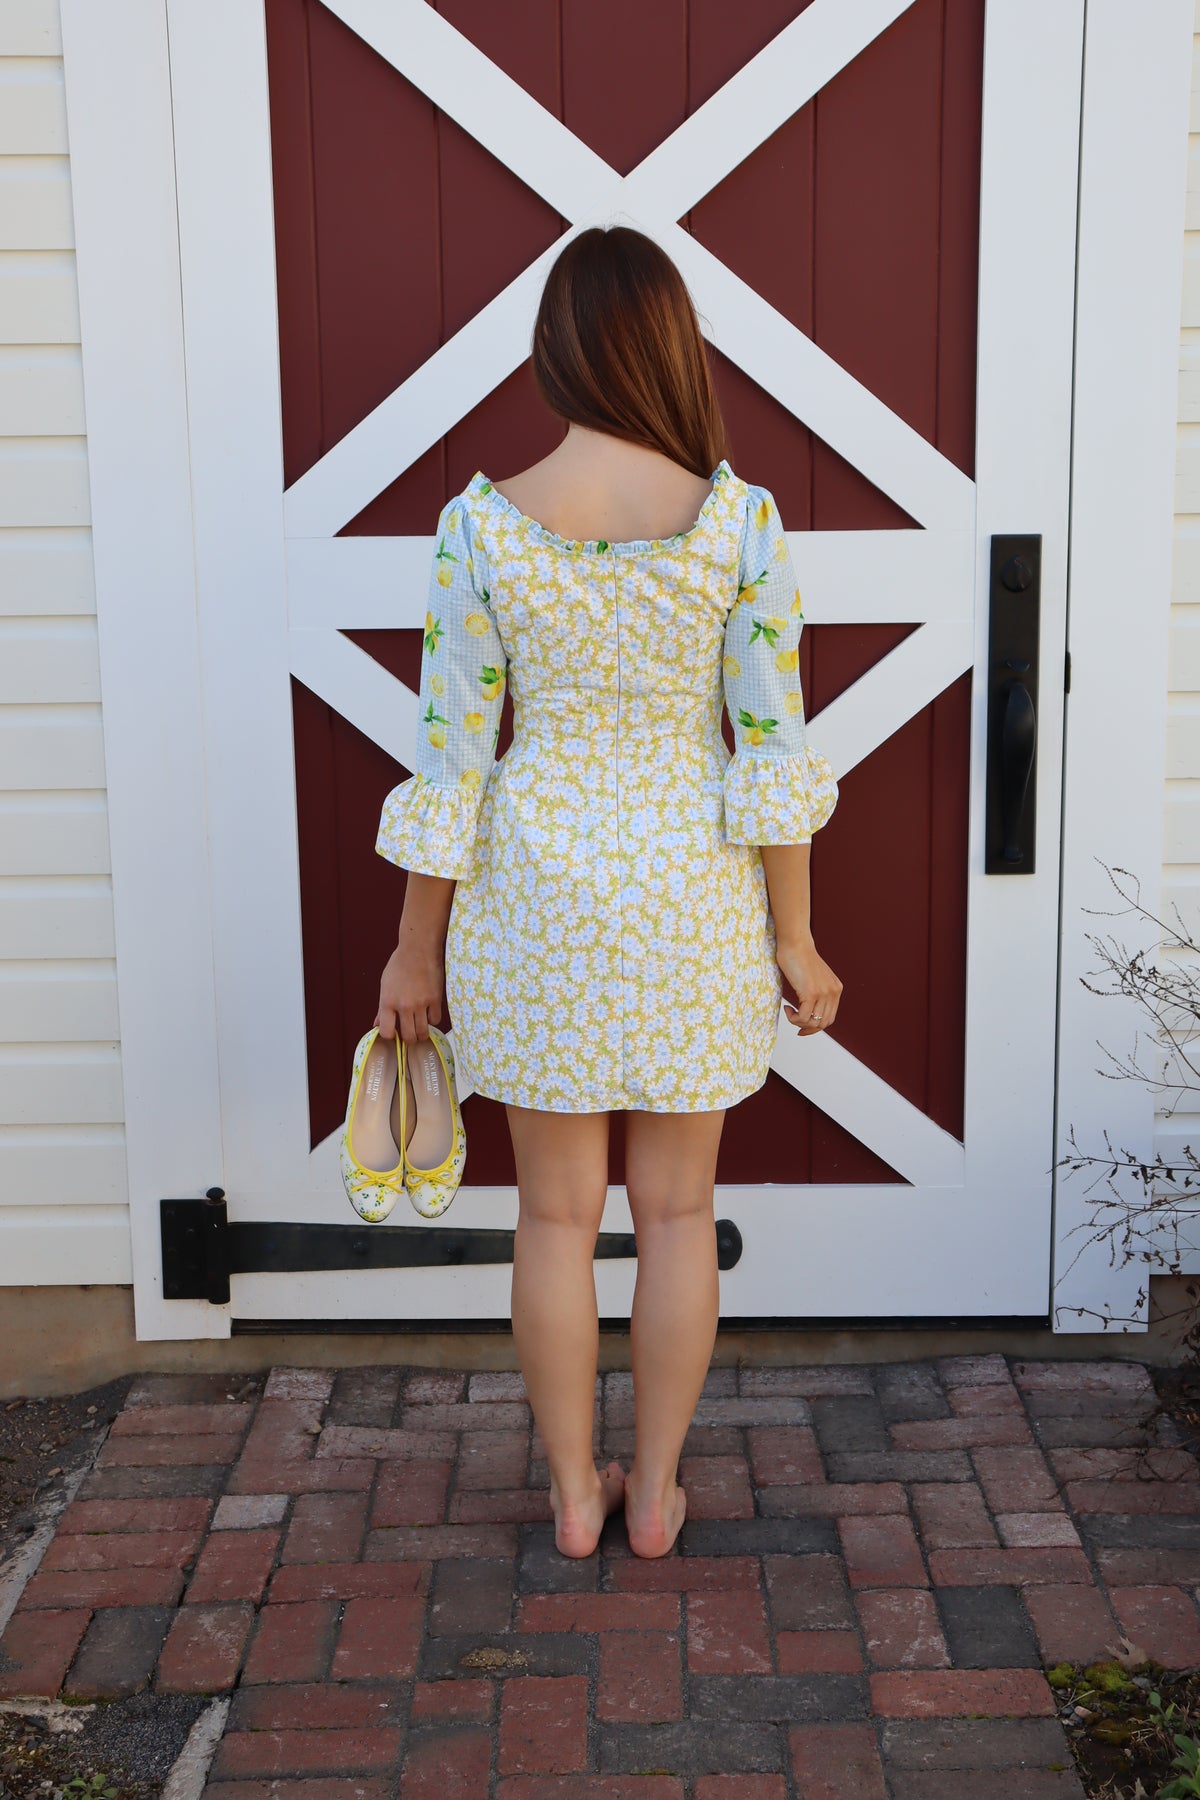 Back view of Model wearing  Sweet Caroline Dress which combines a yellow daisy print with a light blue lemon print.